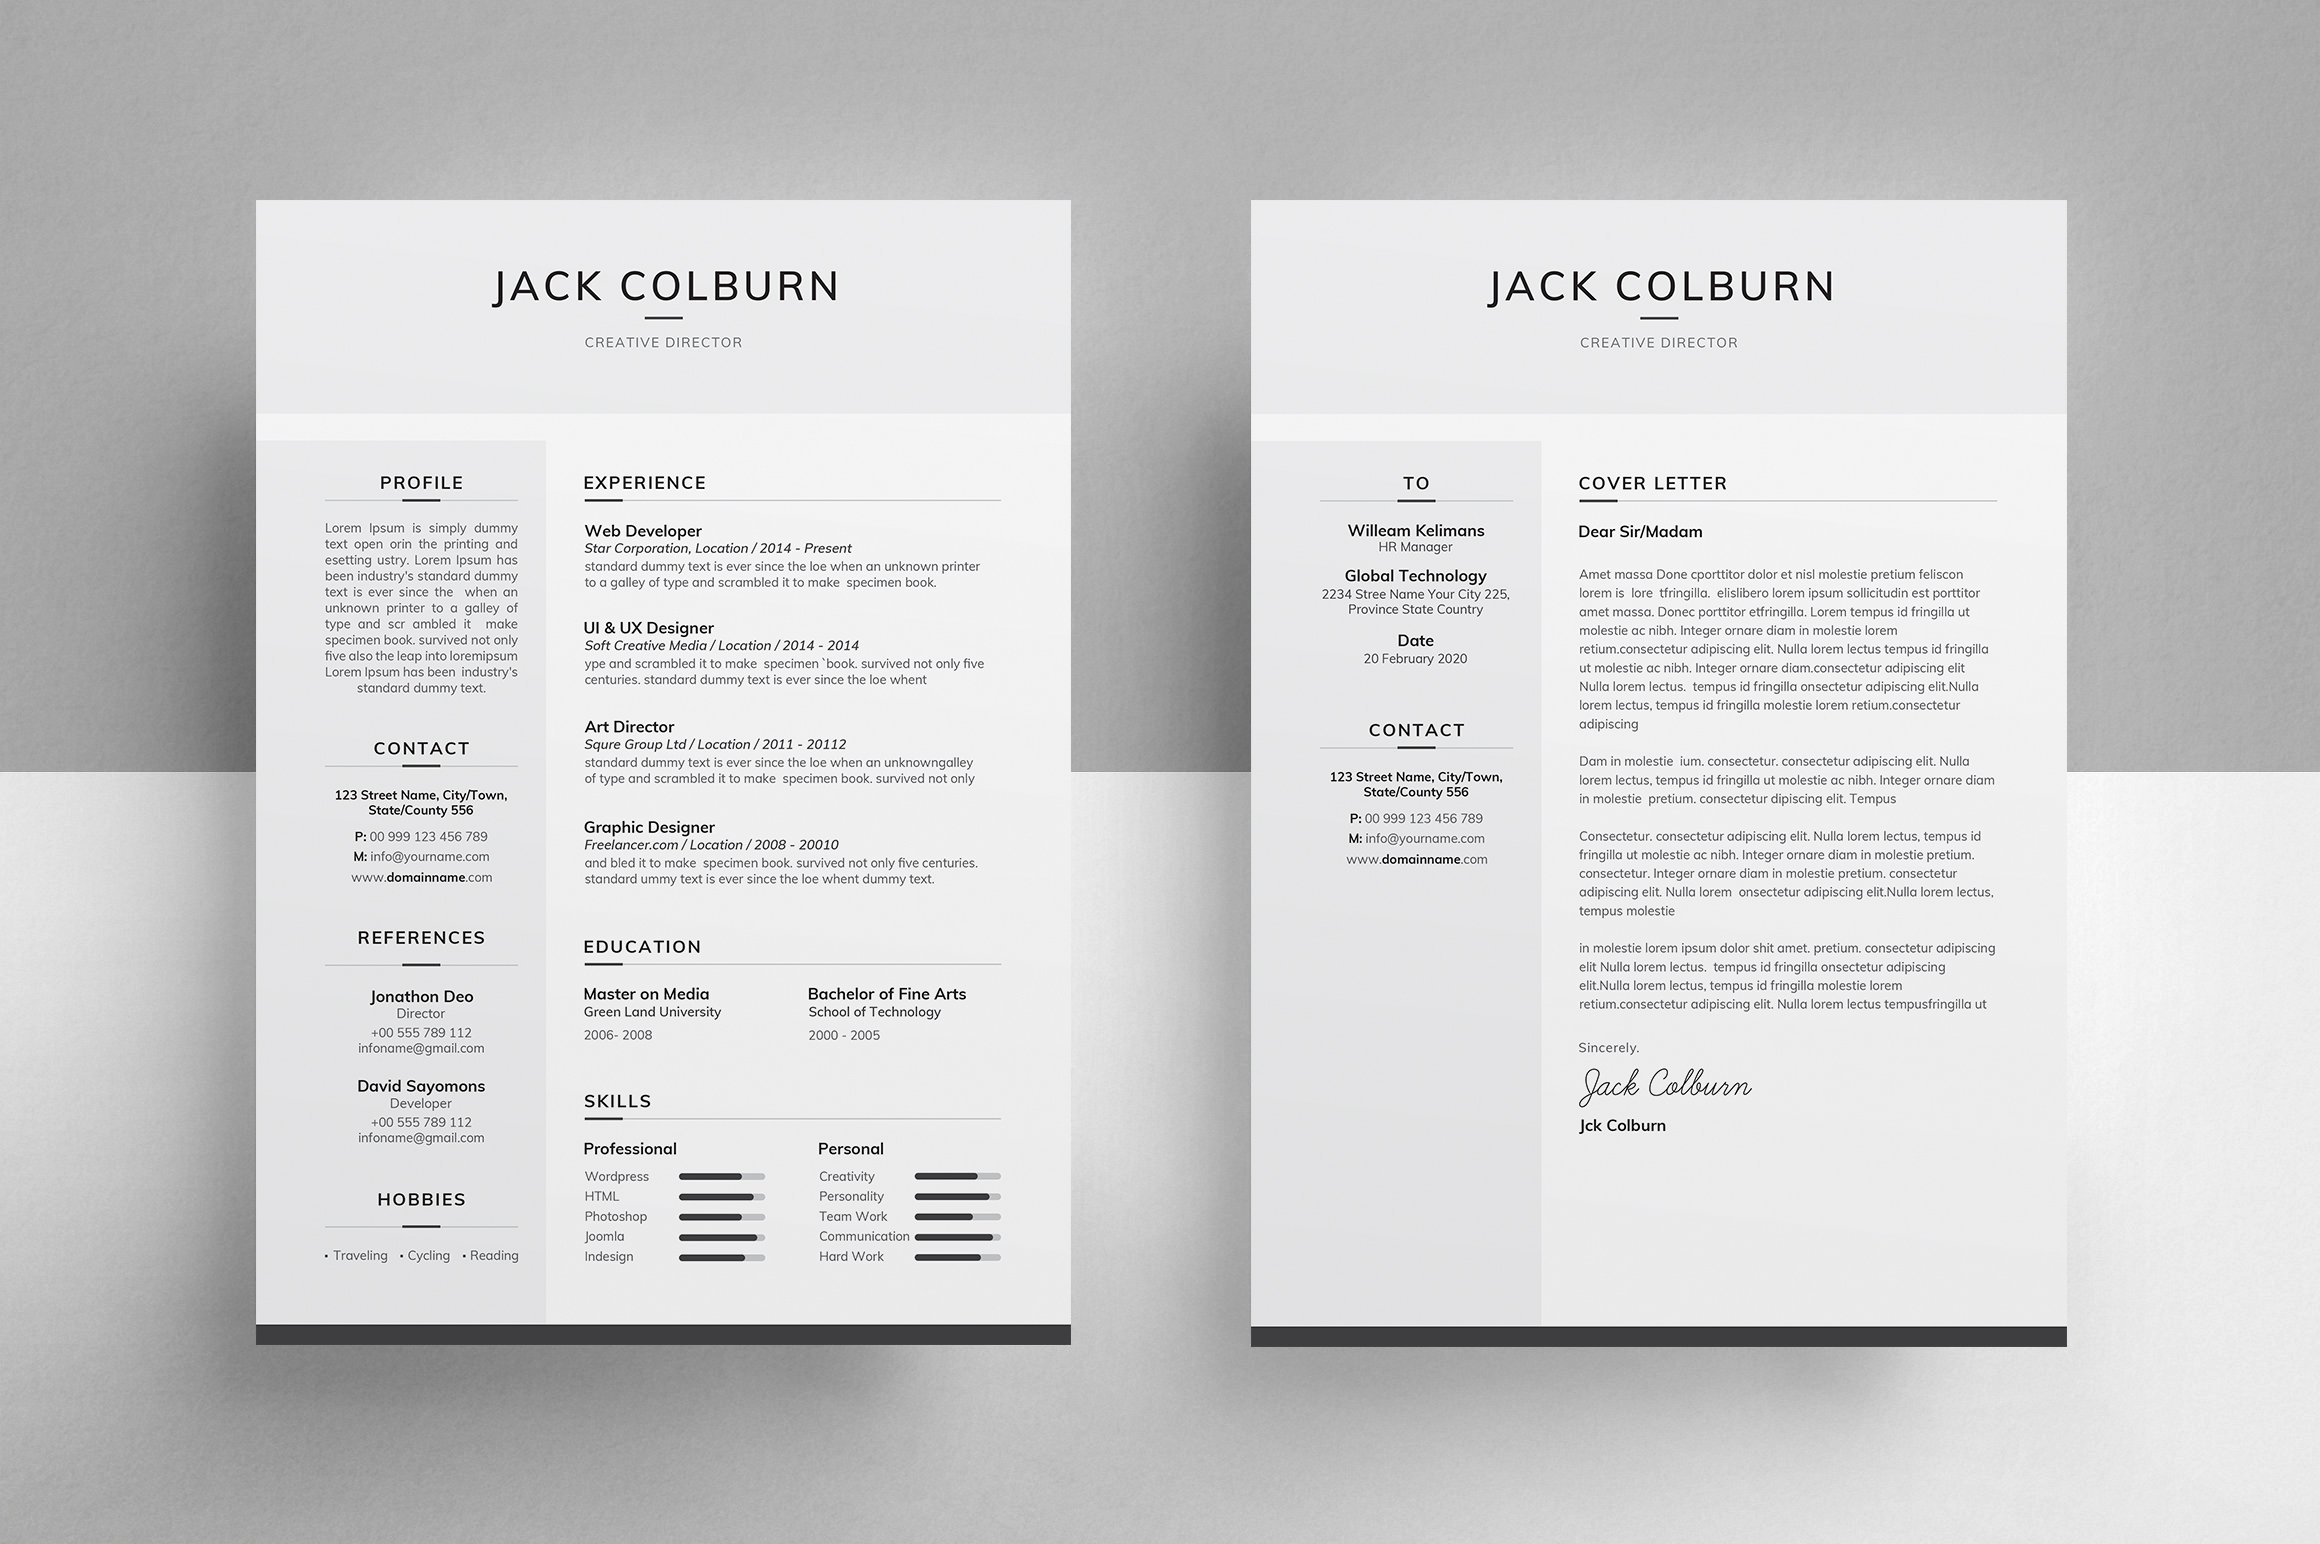 Resume/CV - Clean preview image.